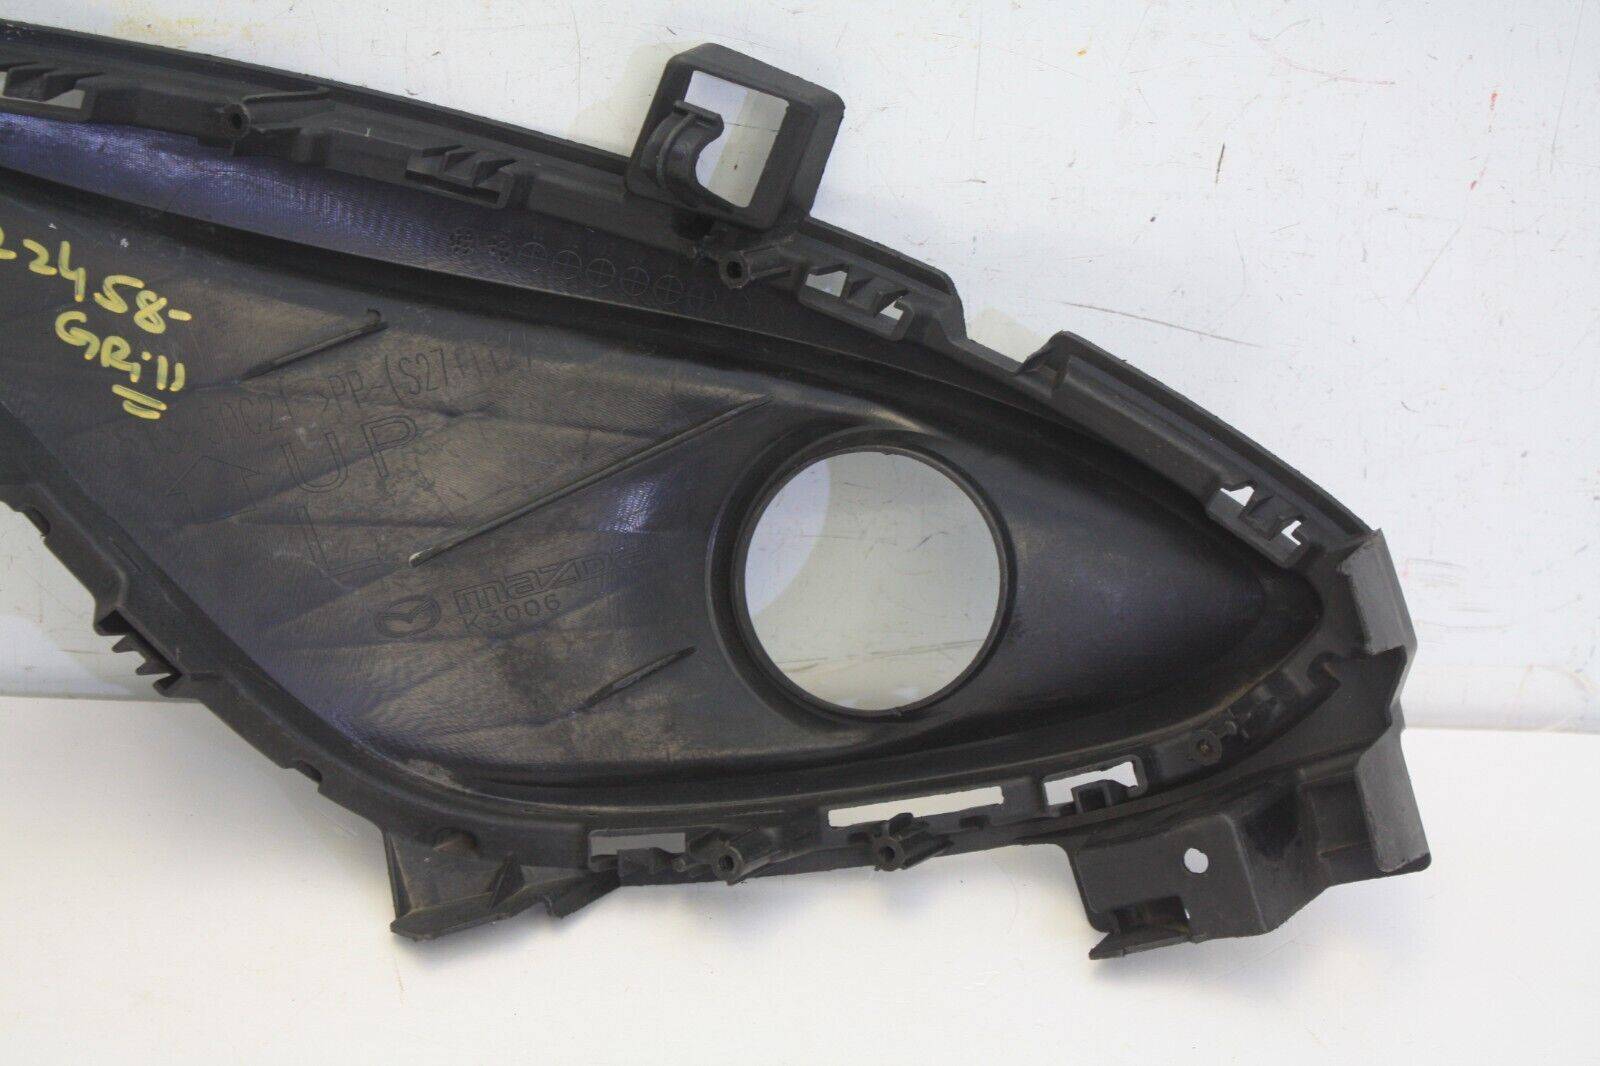 Mazda-5-Front-Bumper-Left-Side-Lower-Grill-2010-TO-2015-C513-50C21-Genuine-176241201496-11